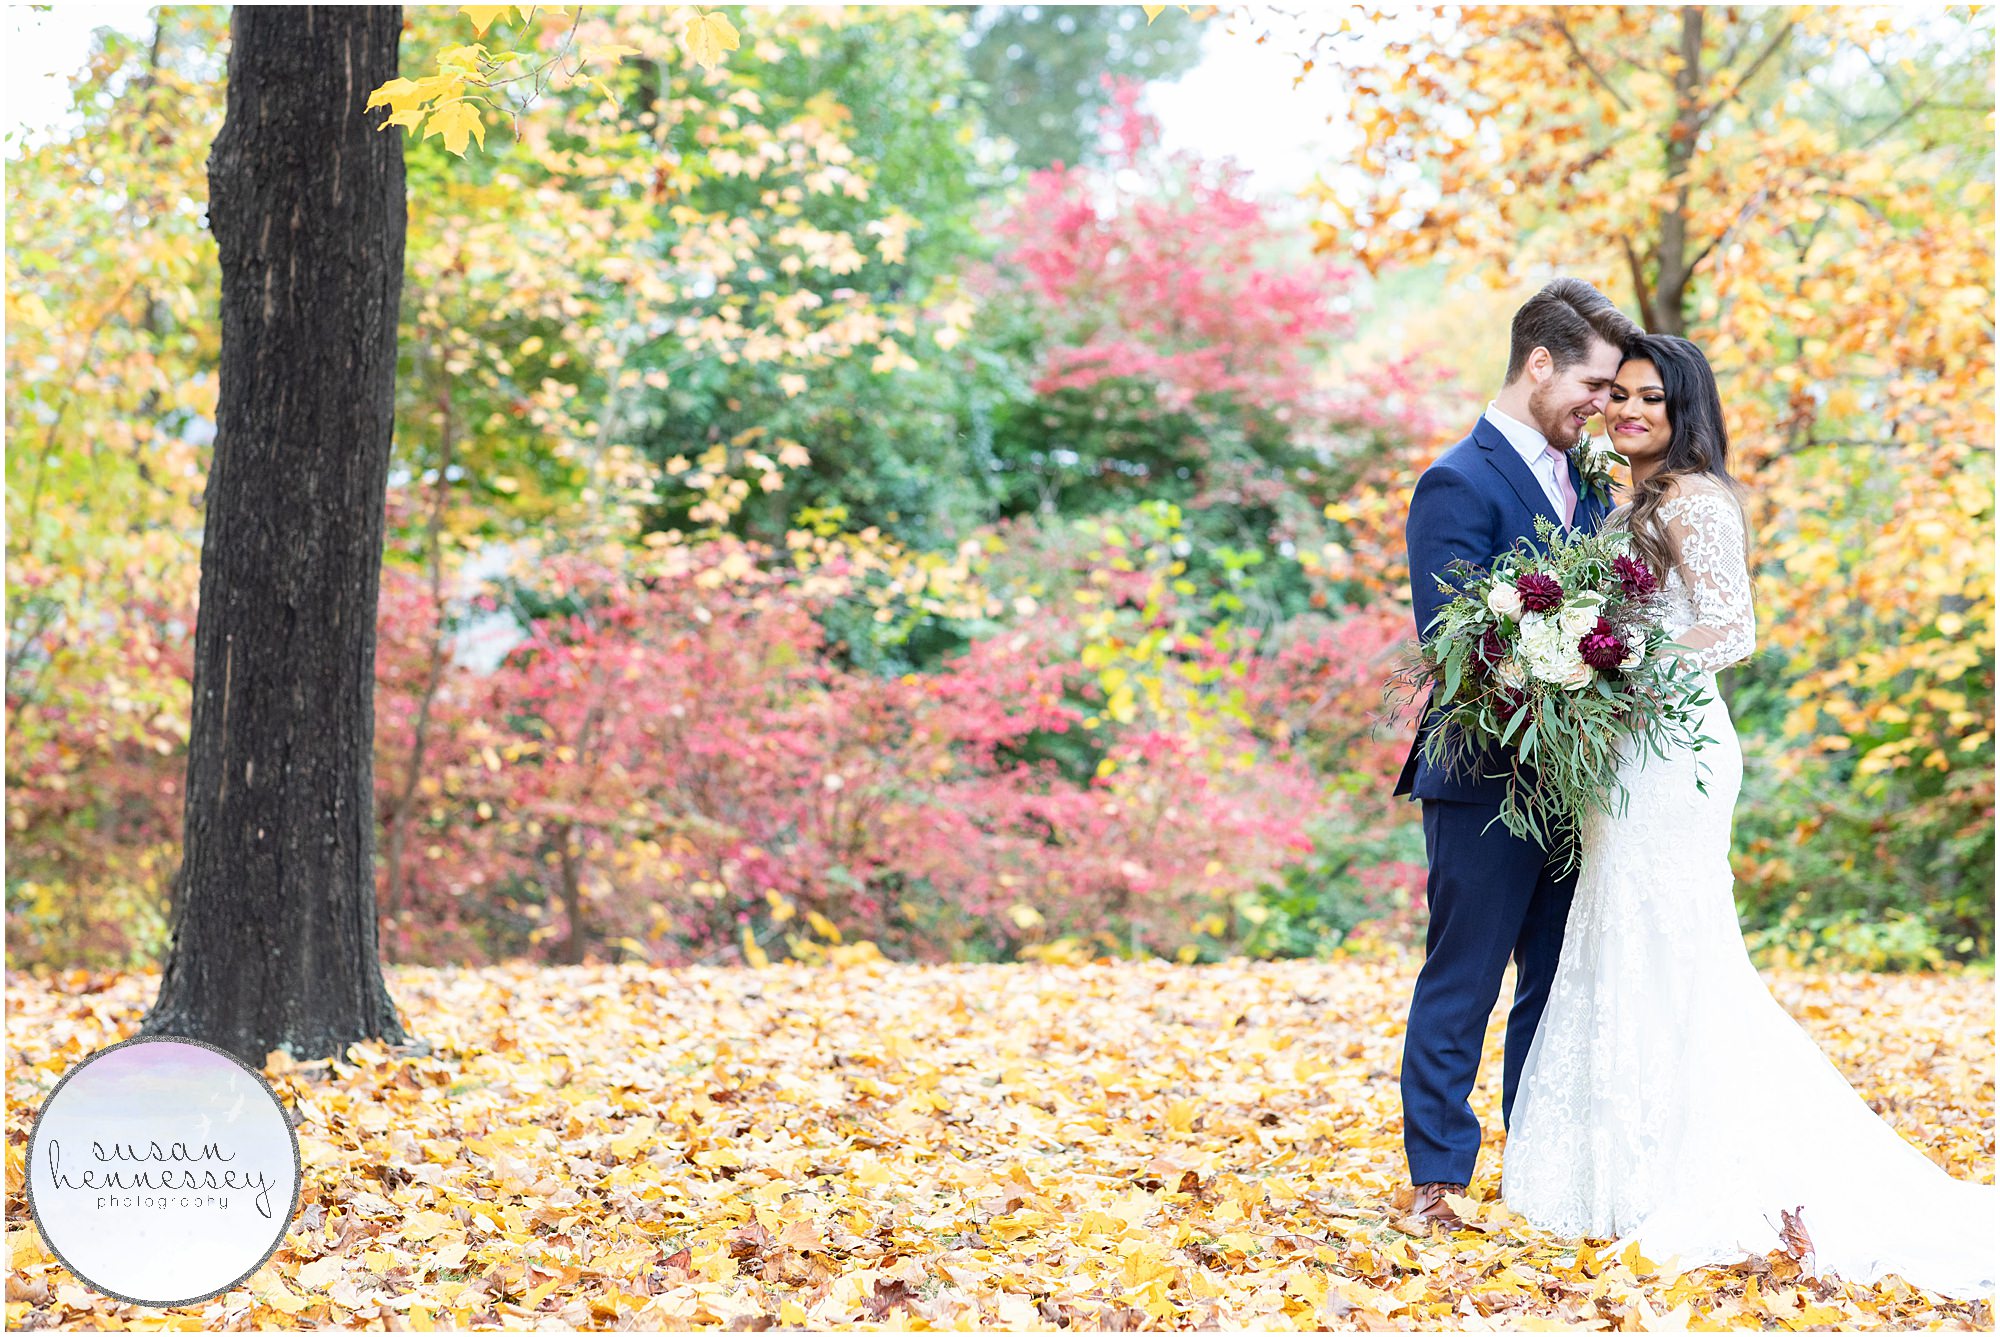 Fiza and Thomas had a South Jersey Microwedding with a church ceremony in Marlton and portraits in Strawbridge Lake Park